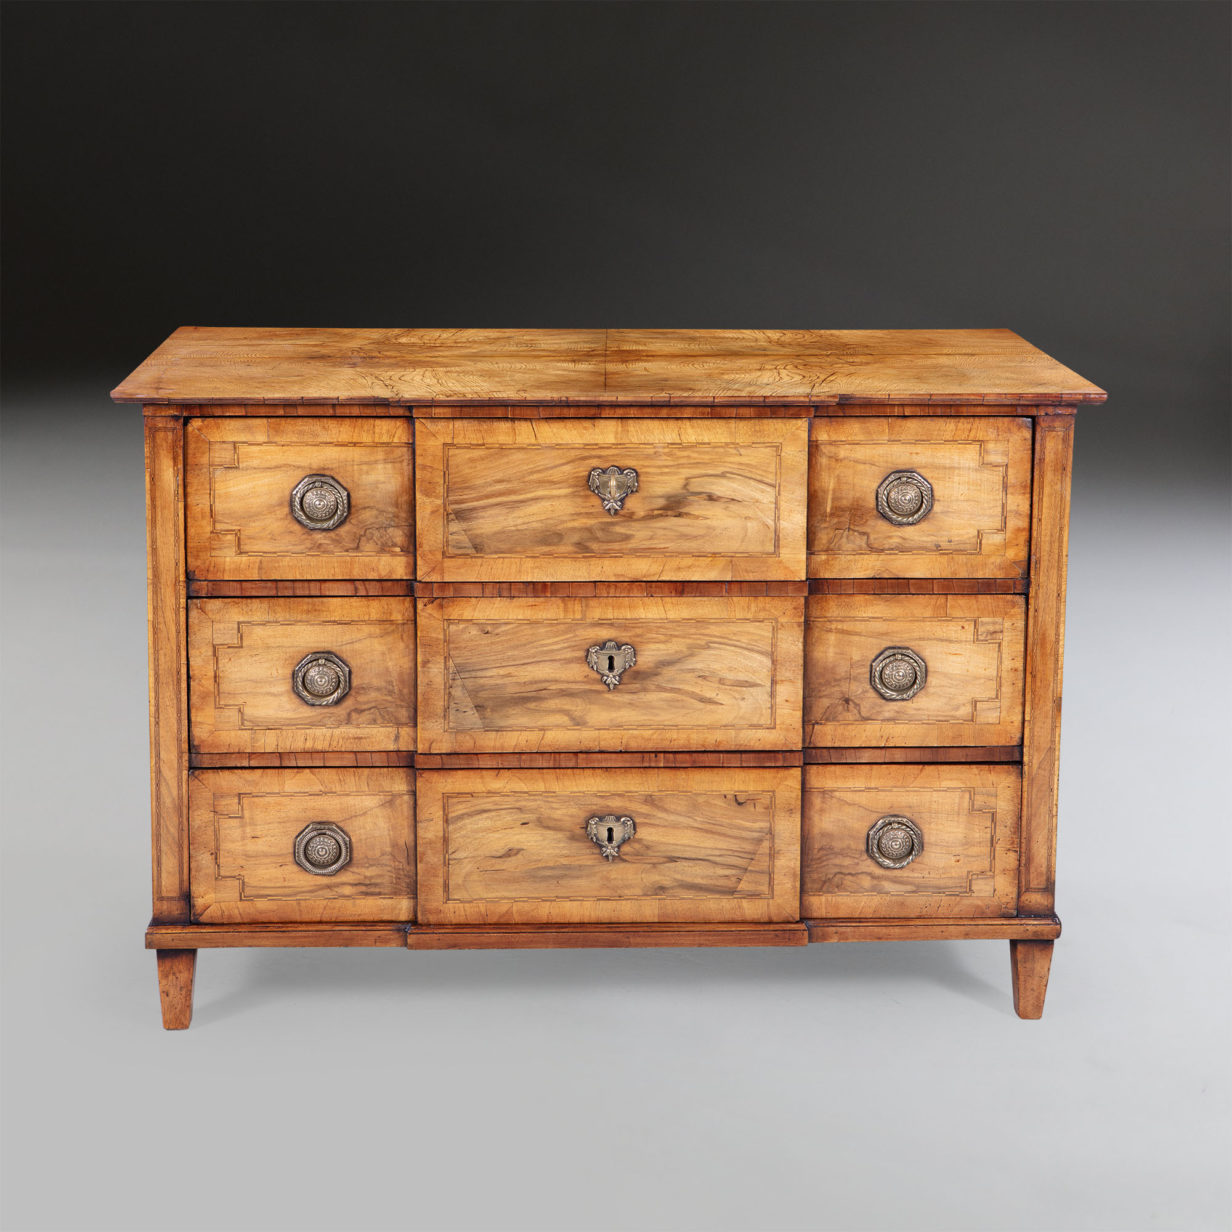 Late 18th century neo-classical walnut commode